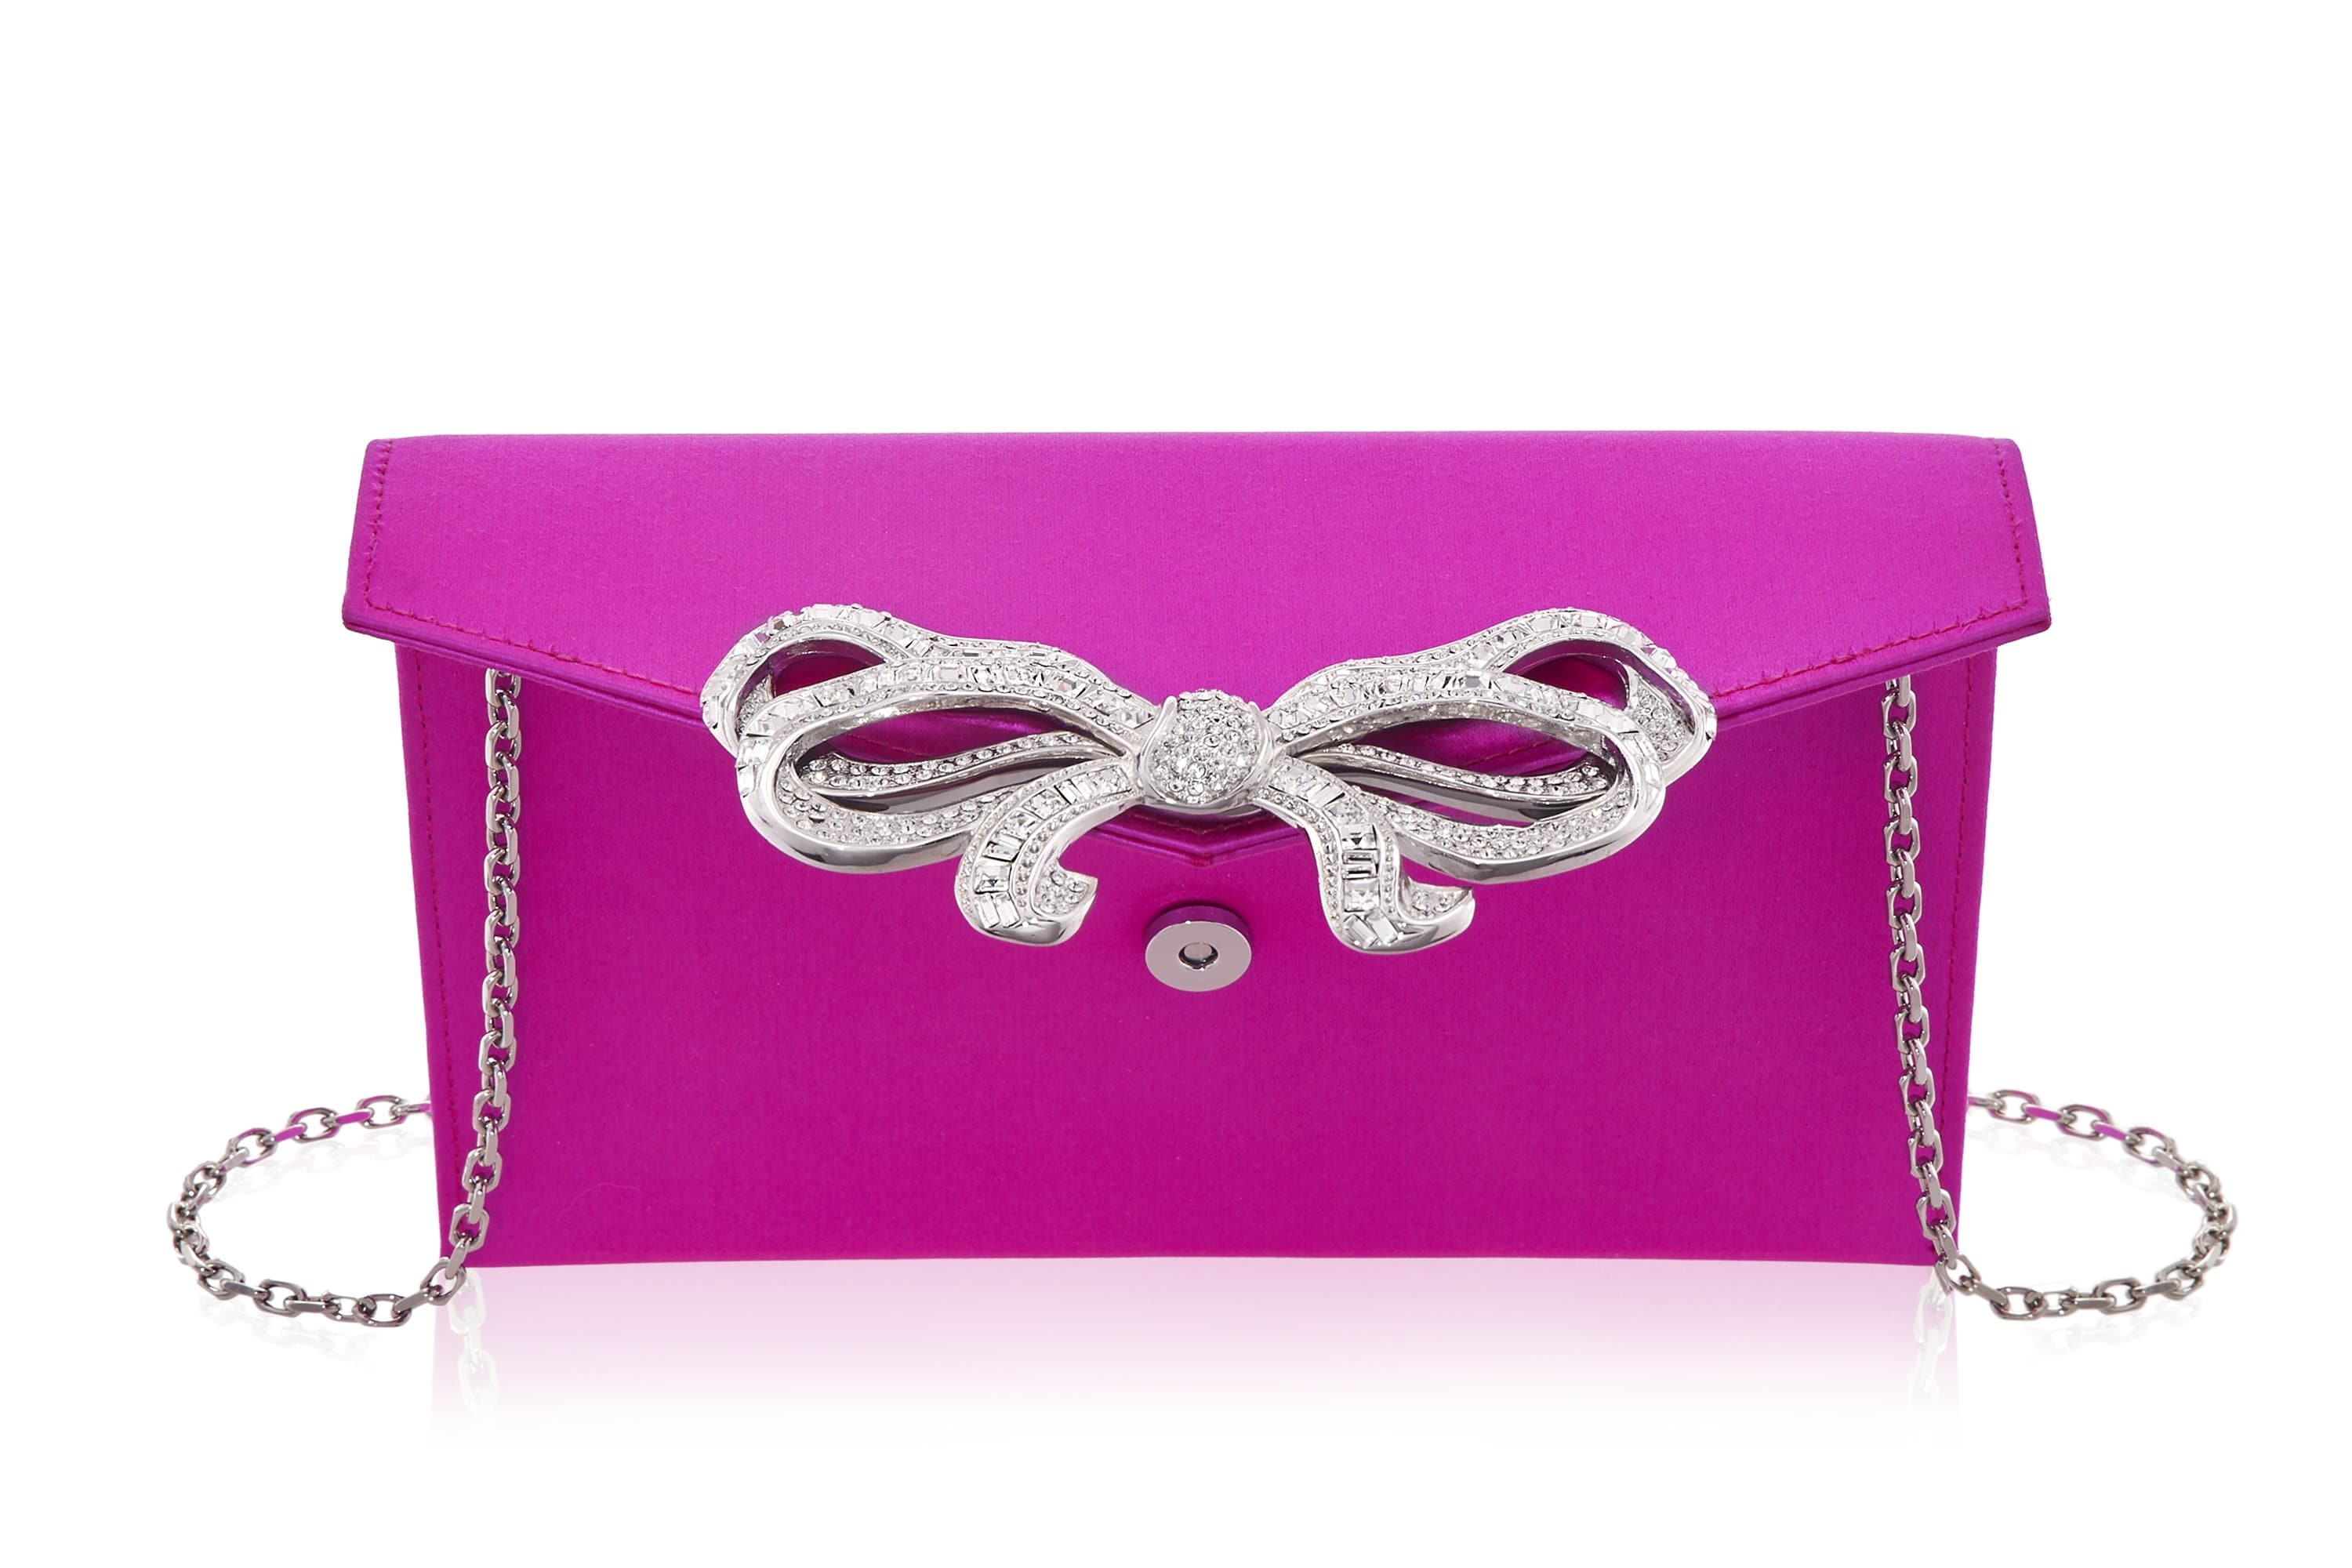 Phase Eight Suede Clutch Bag, Pink at John Lewis & Partners